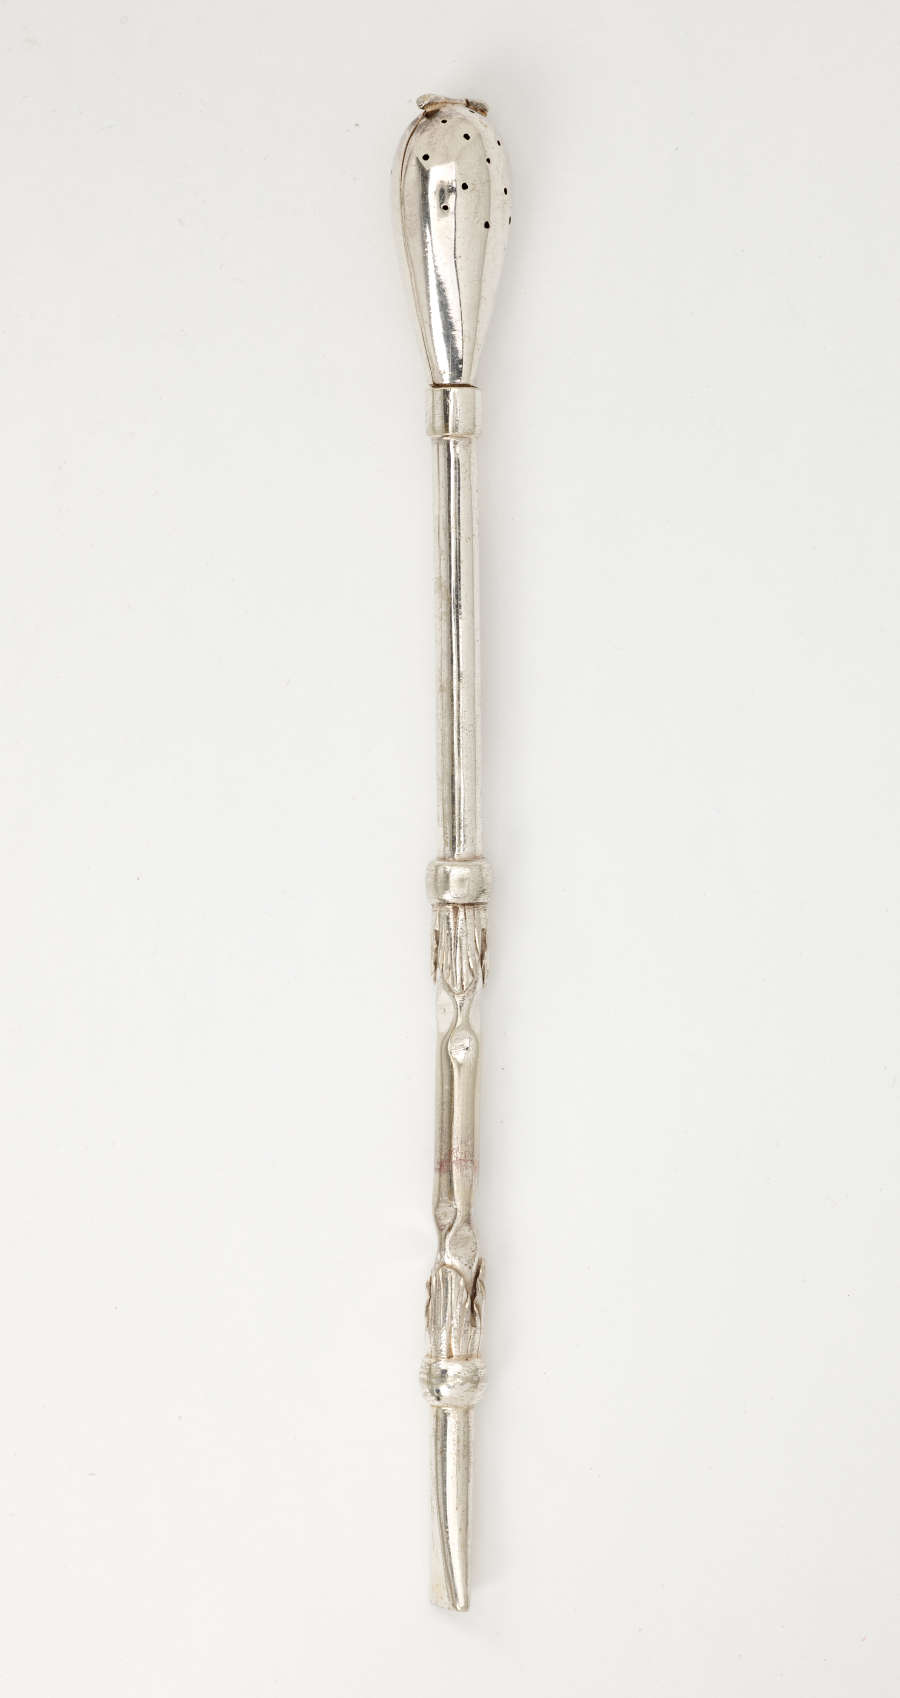 A silver utensil with a long skinny handle and bulbous end with small holes.